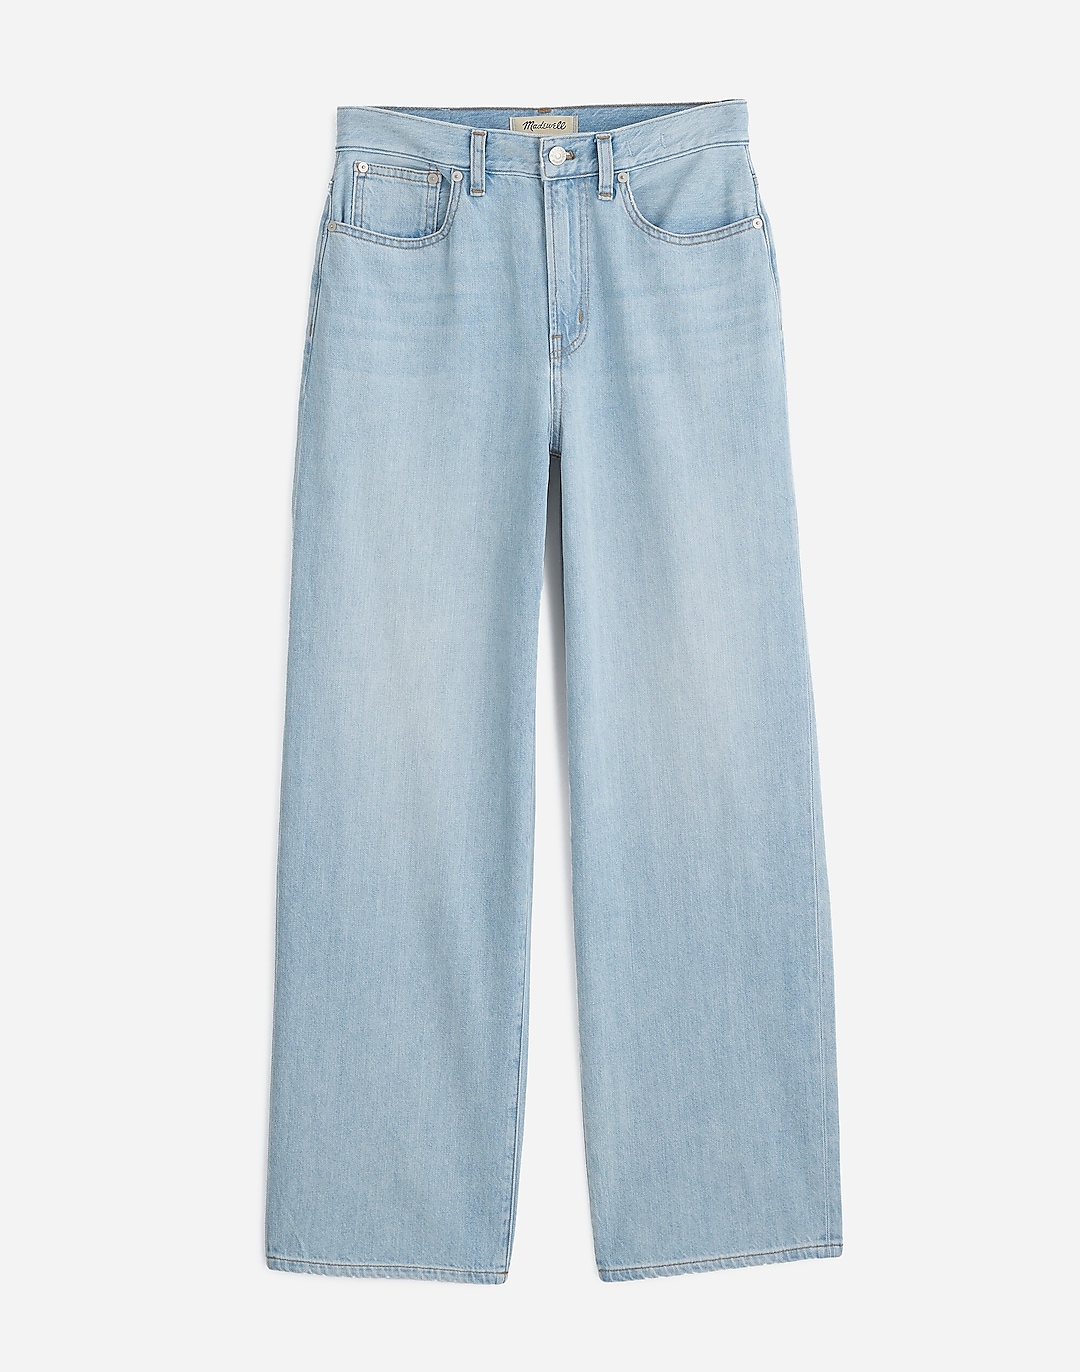 The Perfect Summer Wide-Leg Crop Jean in Fitzgerald Wash | Madewell